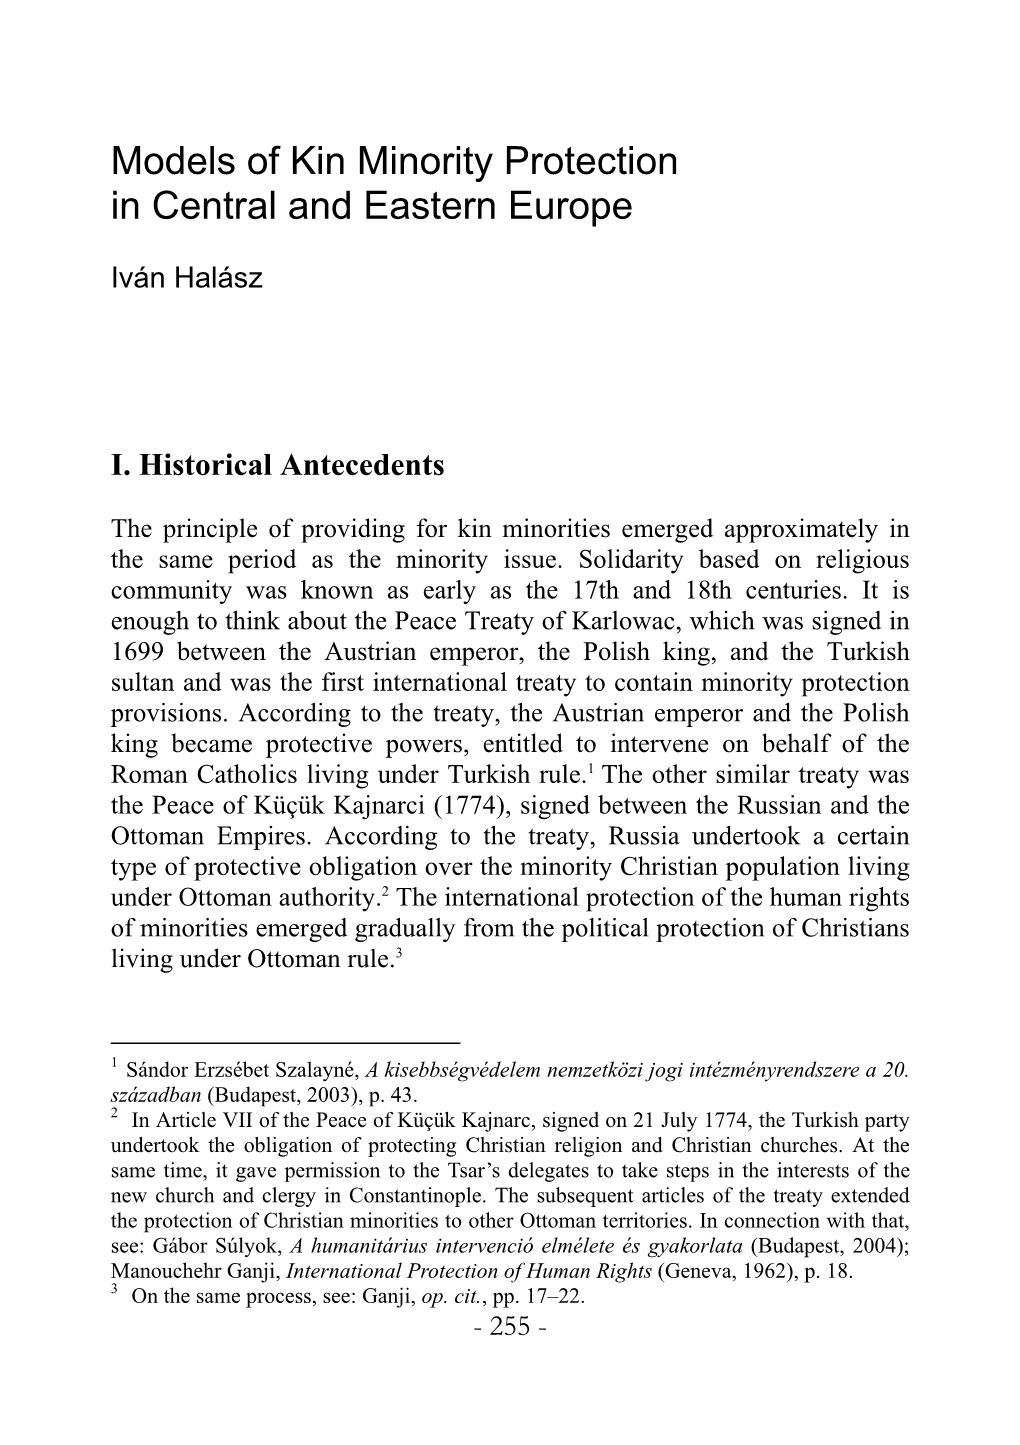 Models of Kin Minority Protection in Central and Eastern Europe